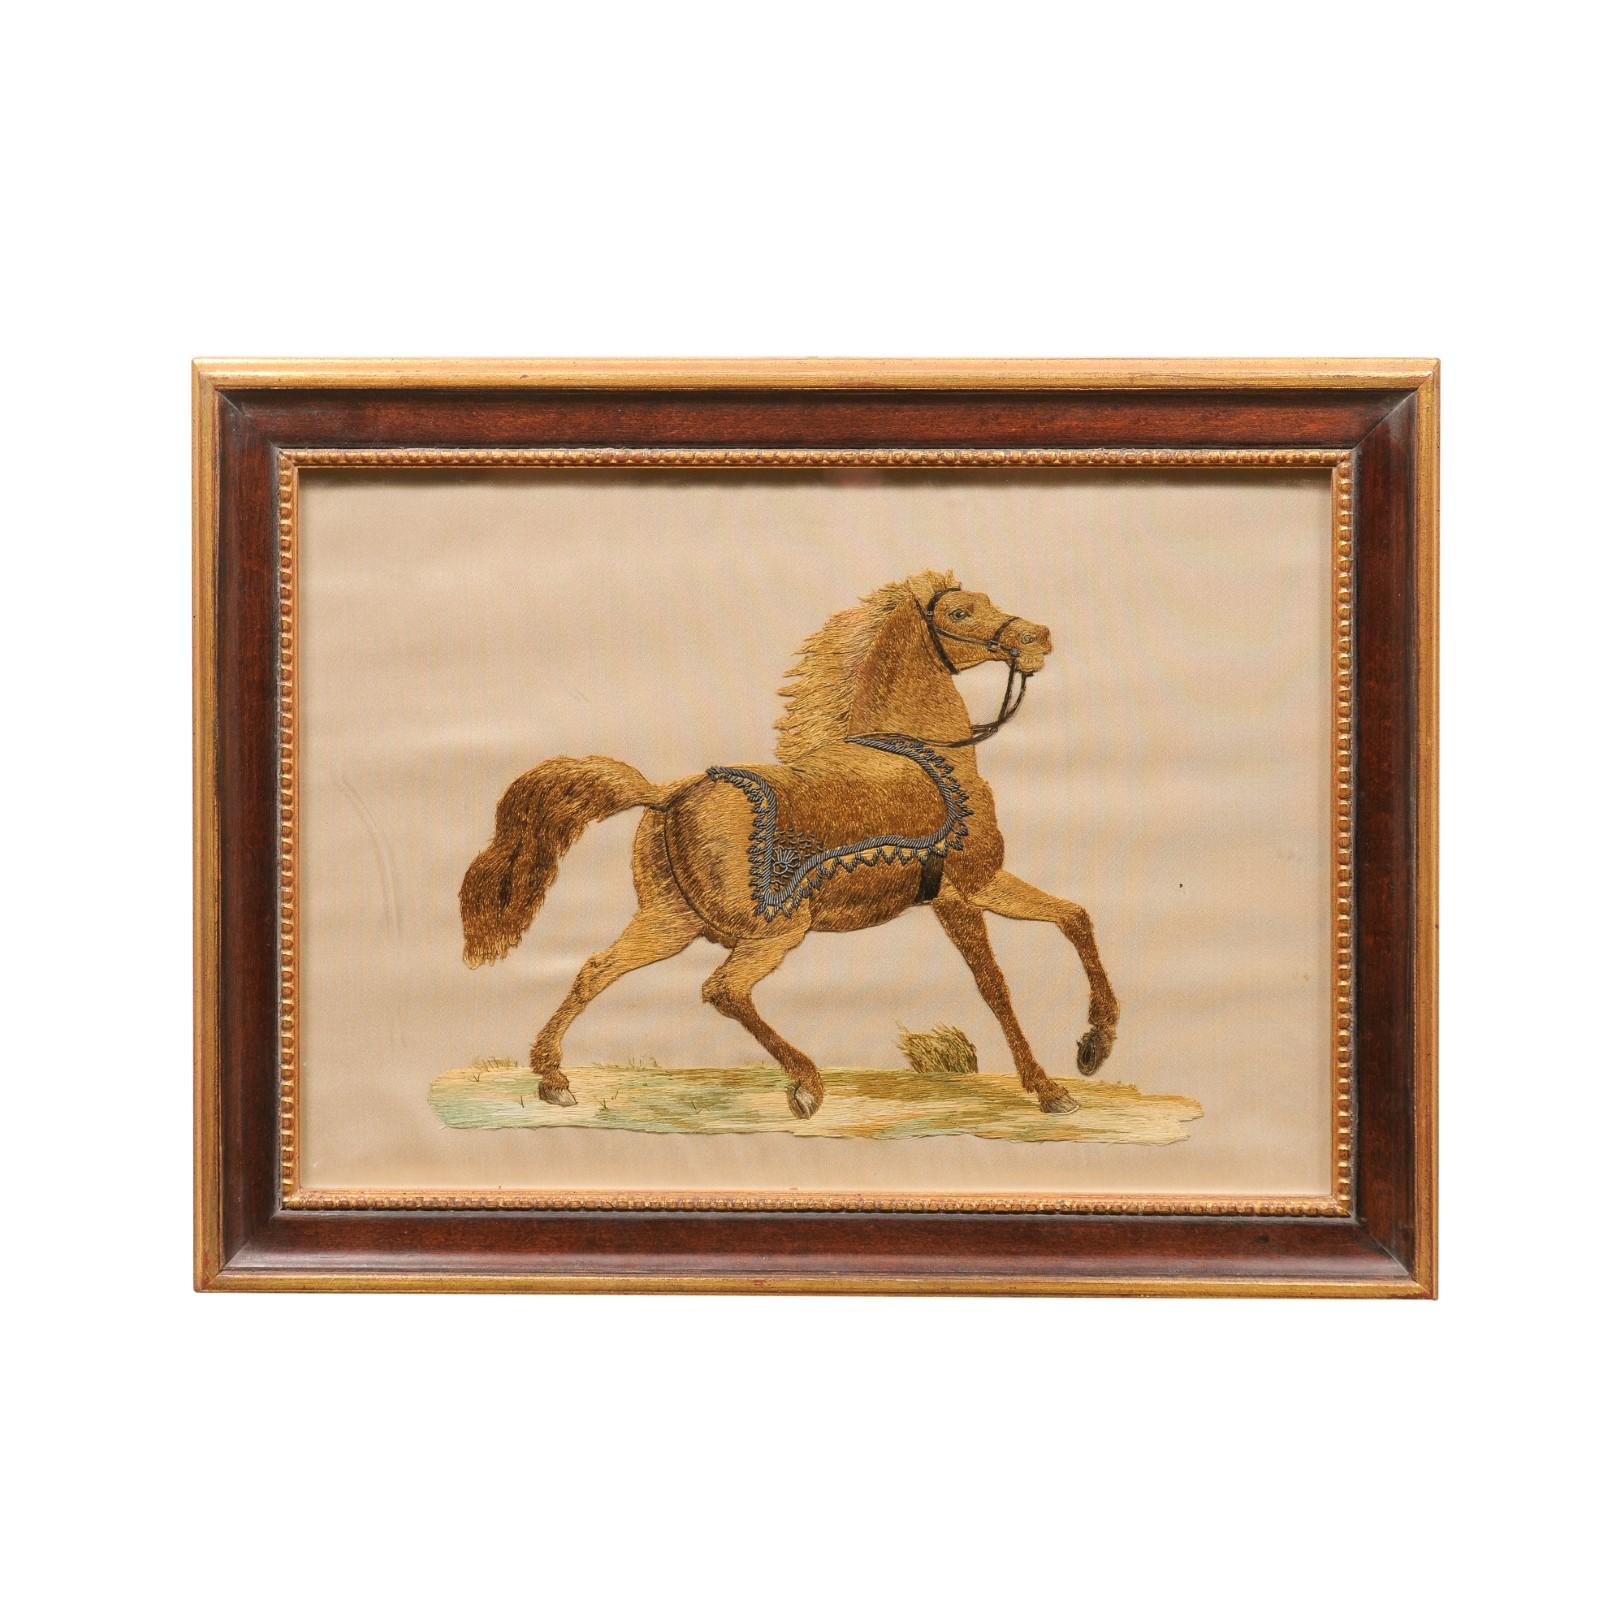 Framed 19th Century Silk Embroidery of Horse For Sale 4